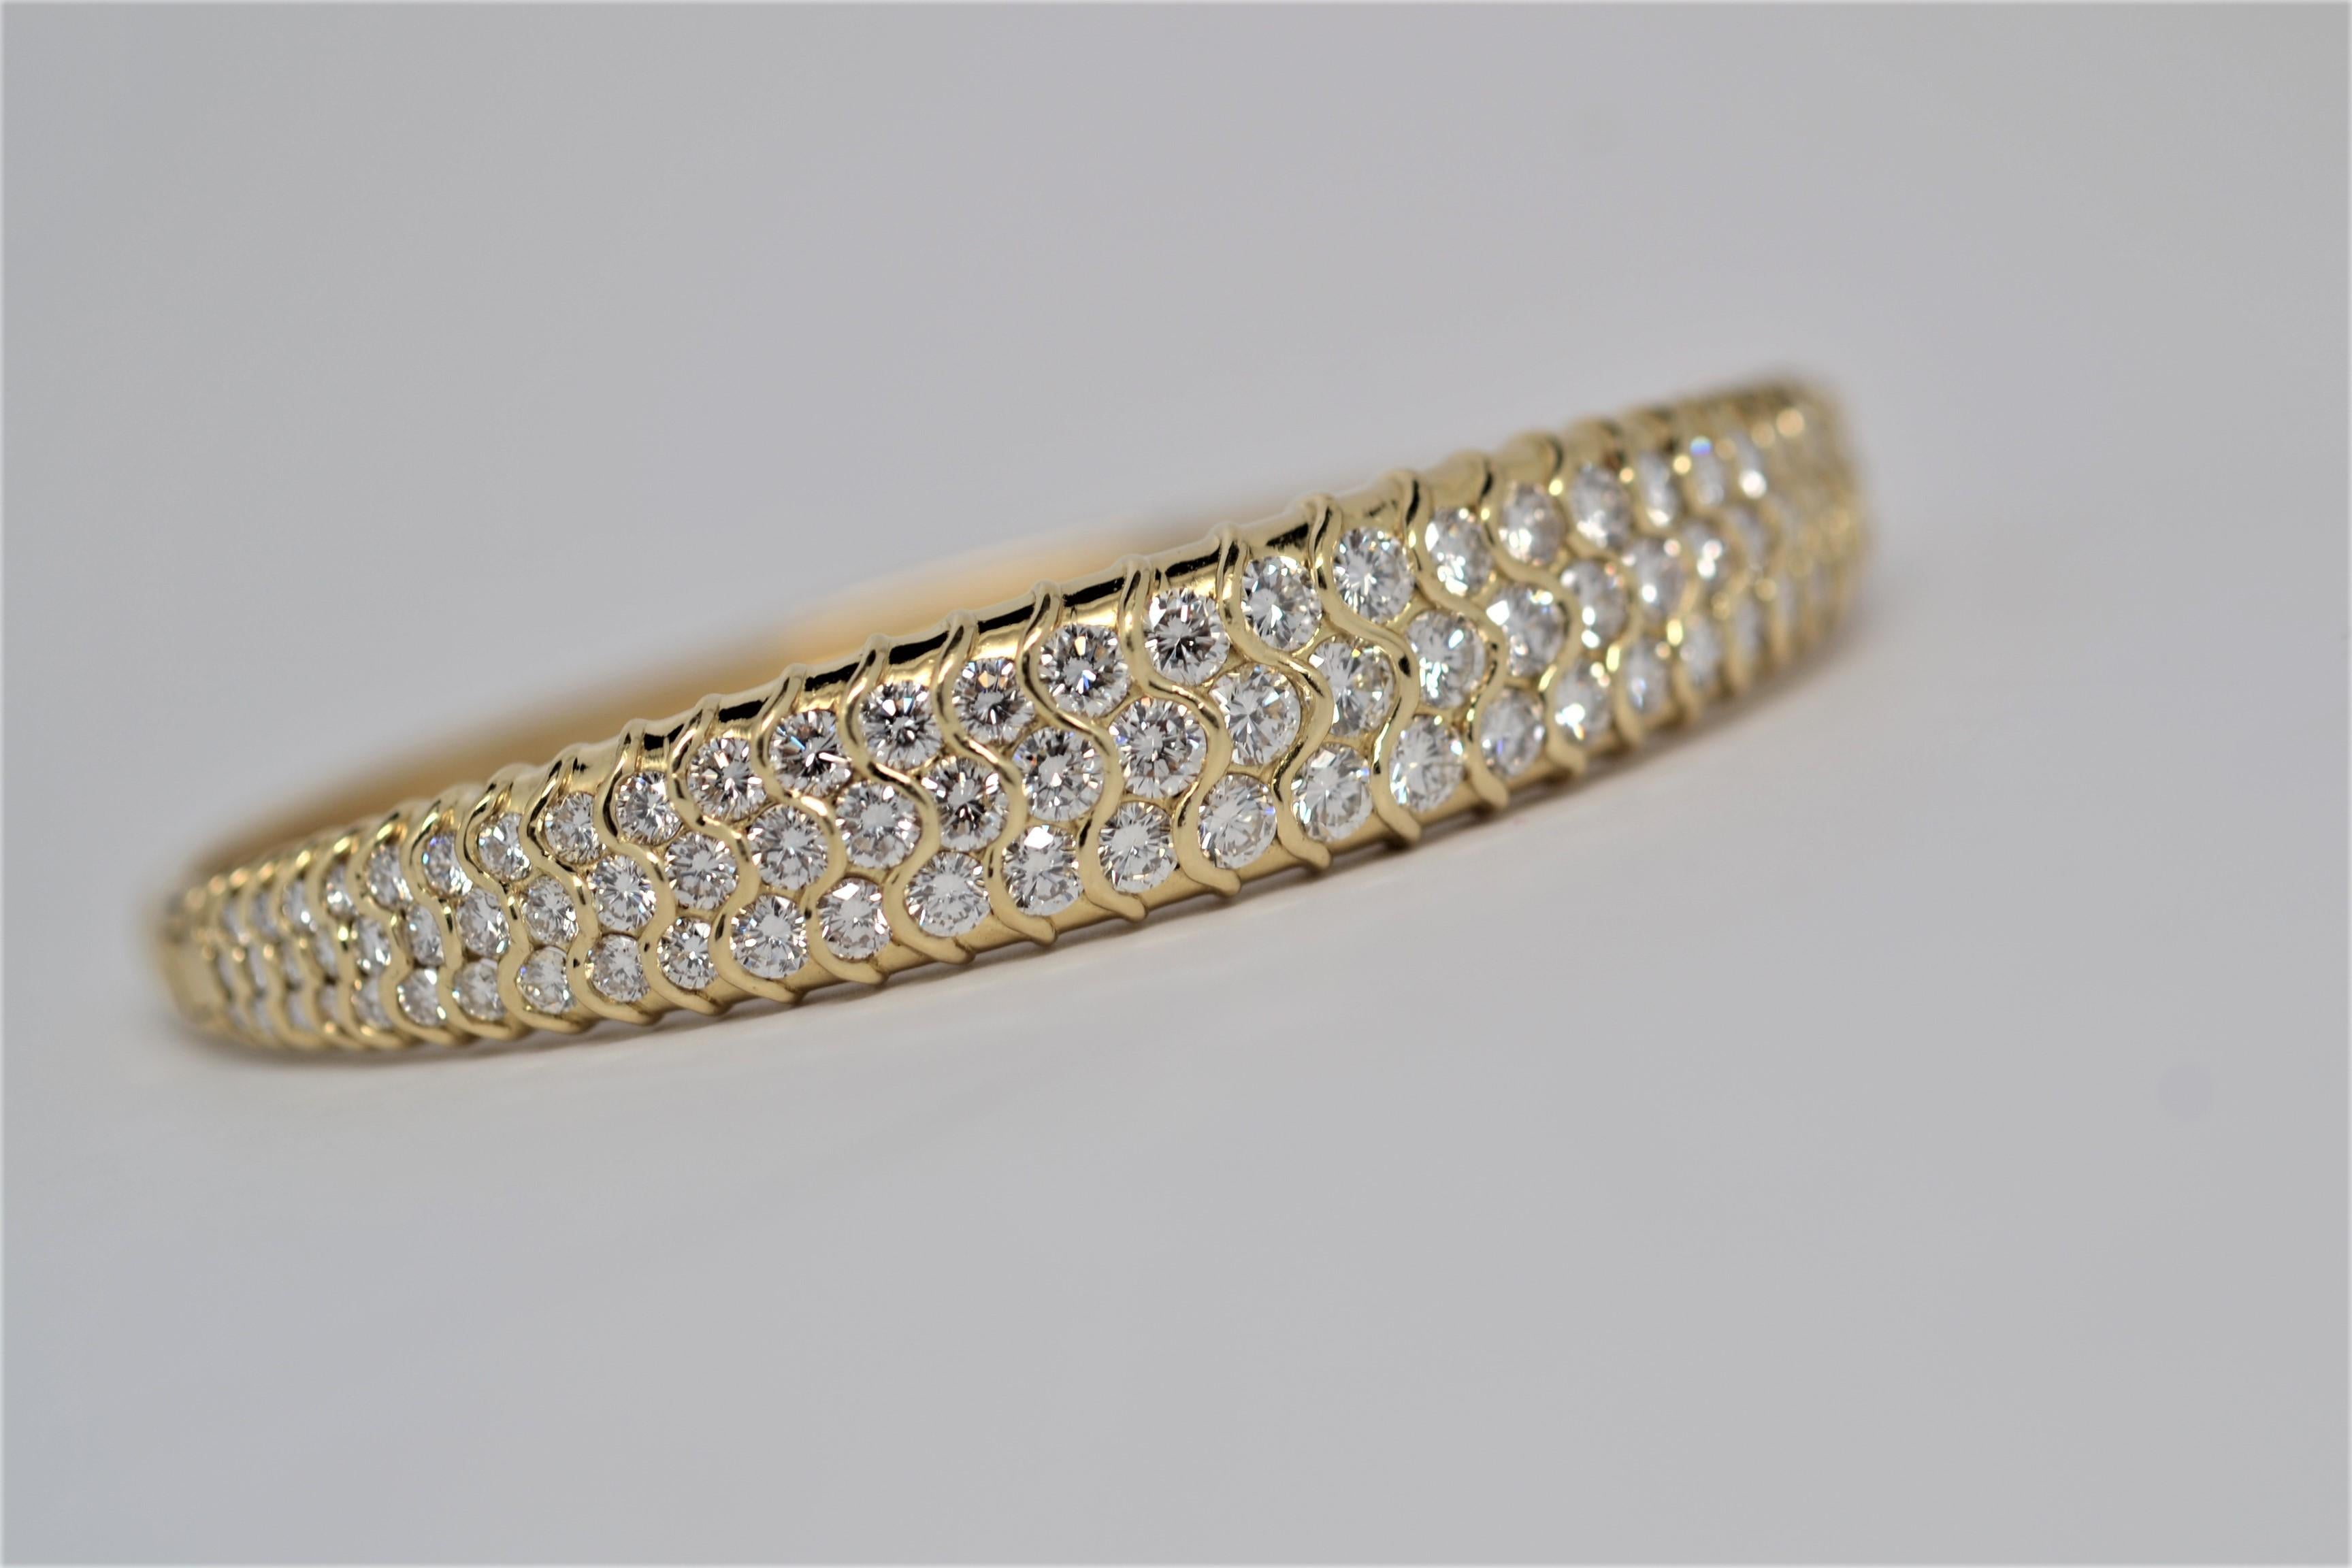 An elegant 18K Yellow Gold and Diamond bangle bracelet. This handmade bangle is 18K Yellow Gold and set halfway around with Round Brilliant Cut Diamonds in a graduated layout. A total of ninety nine Round Brilliant Cut Diamonds weighs 5.54ct,